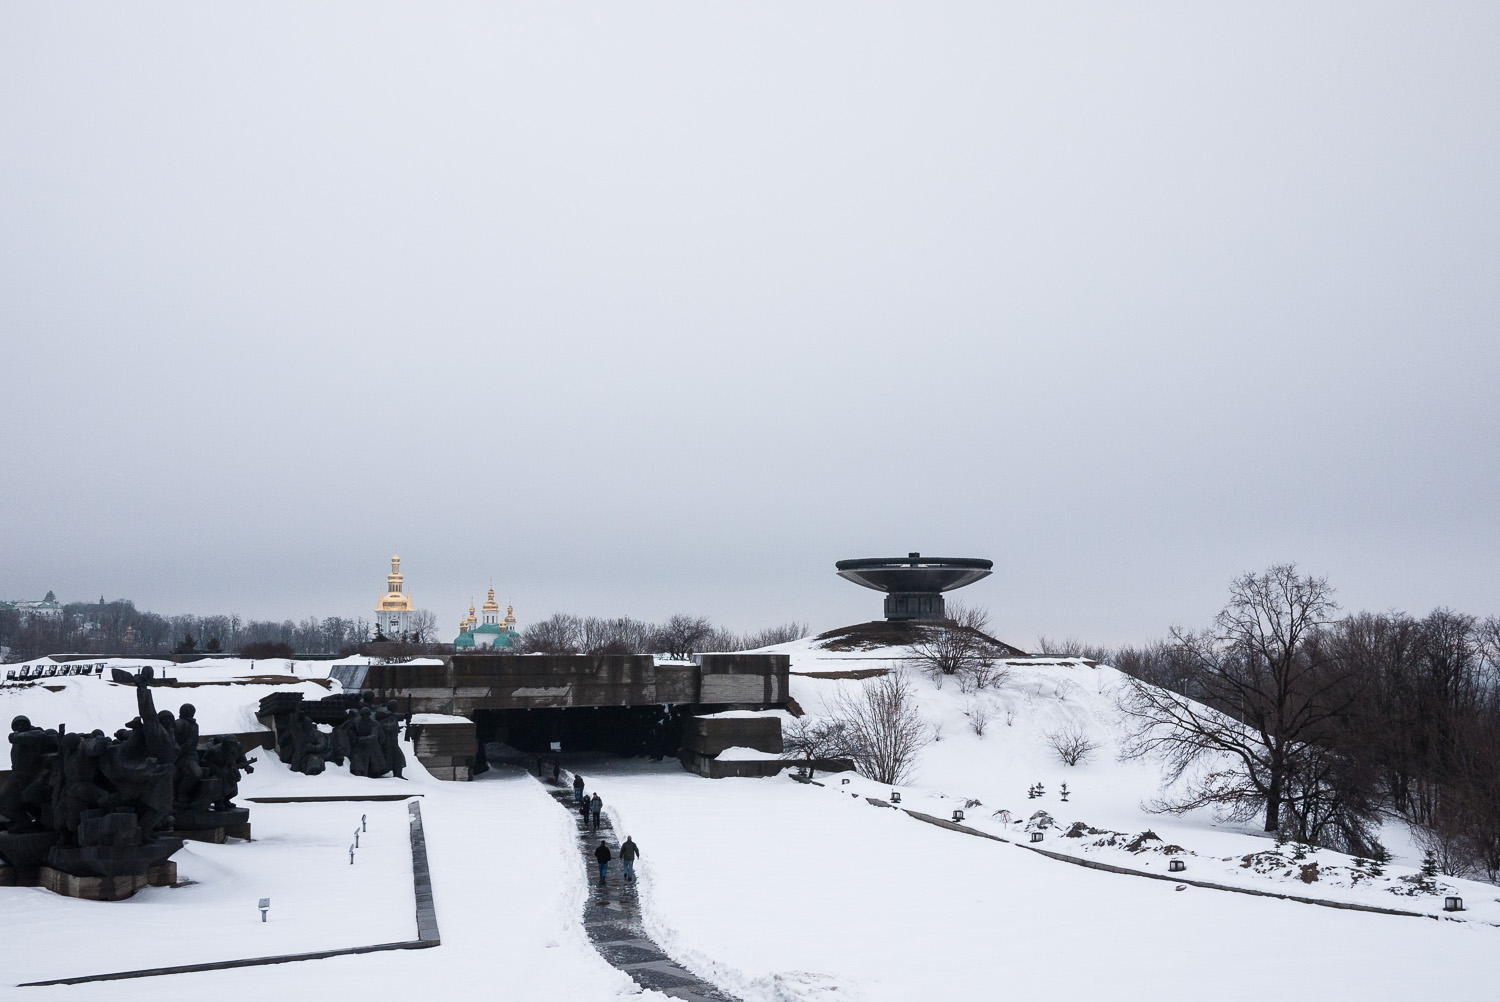  The Museum of the Great Patriotic War in Kyiv, with churches of the Pechersk Lavra monastery complex in the distance. 